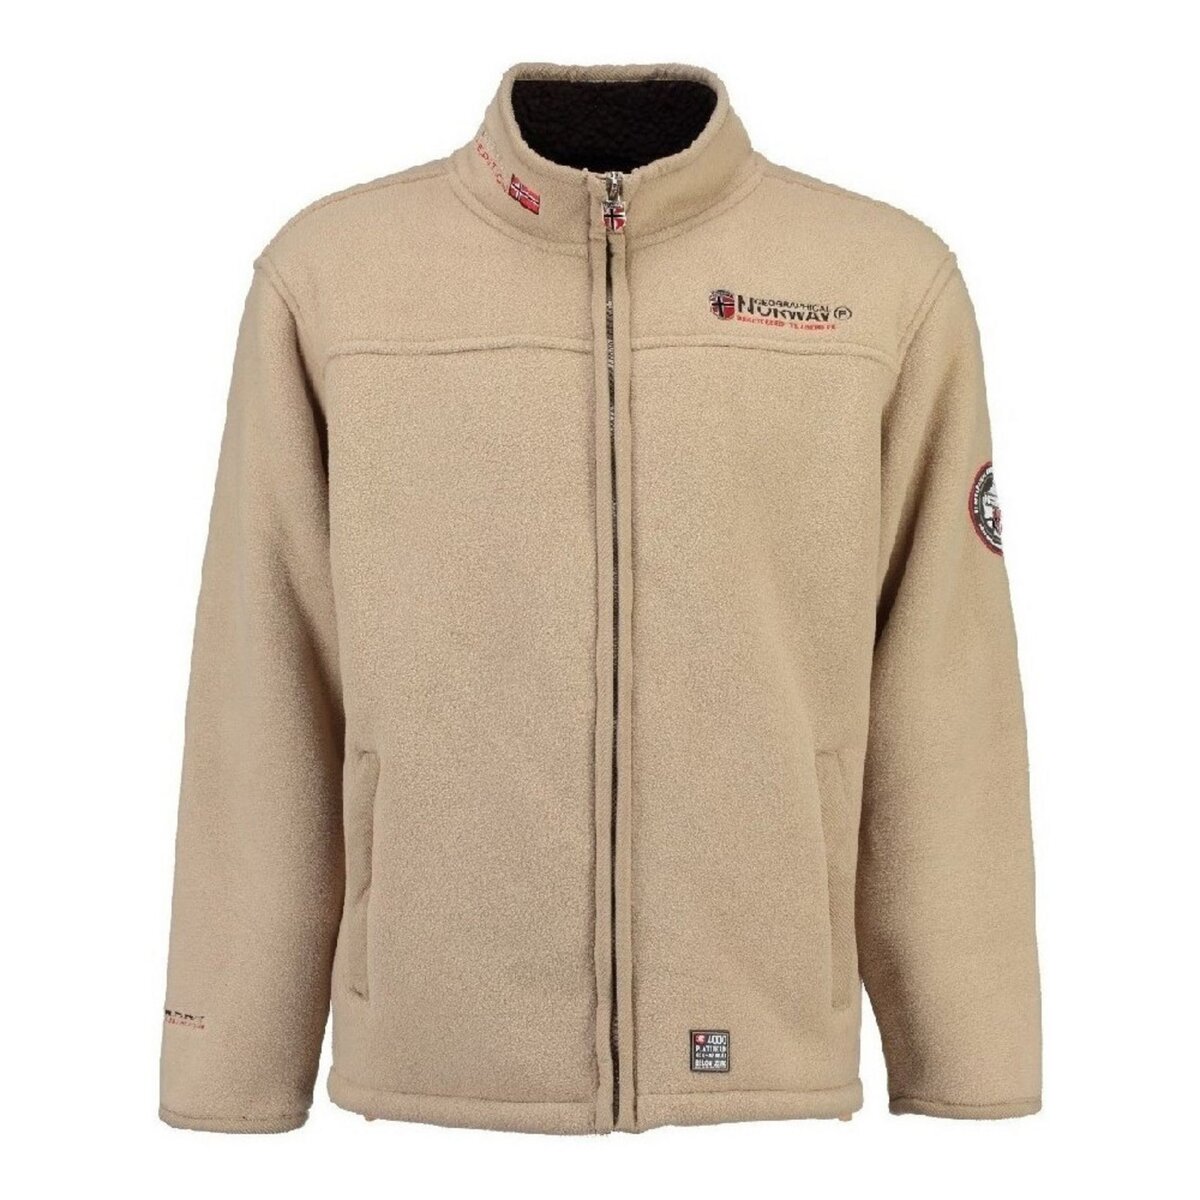 GEOGRAPHICAL NORWAY Veste Polaire Beige Garçon Geographical Norway Ubolt